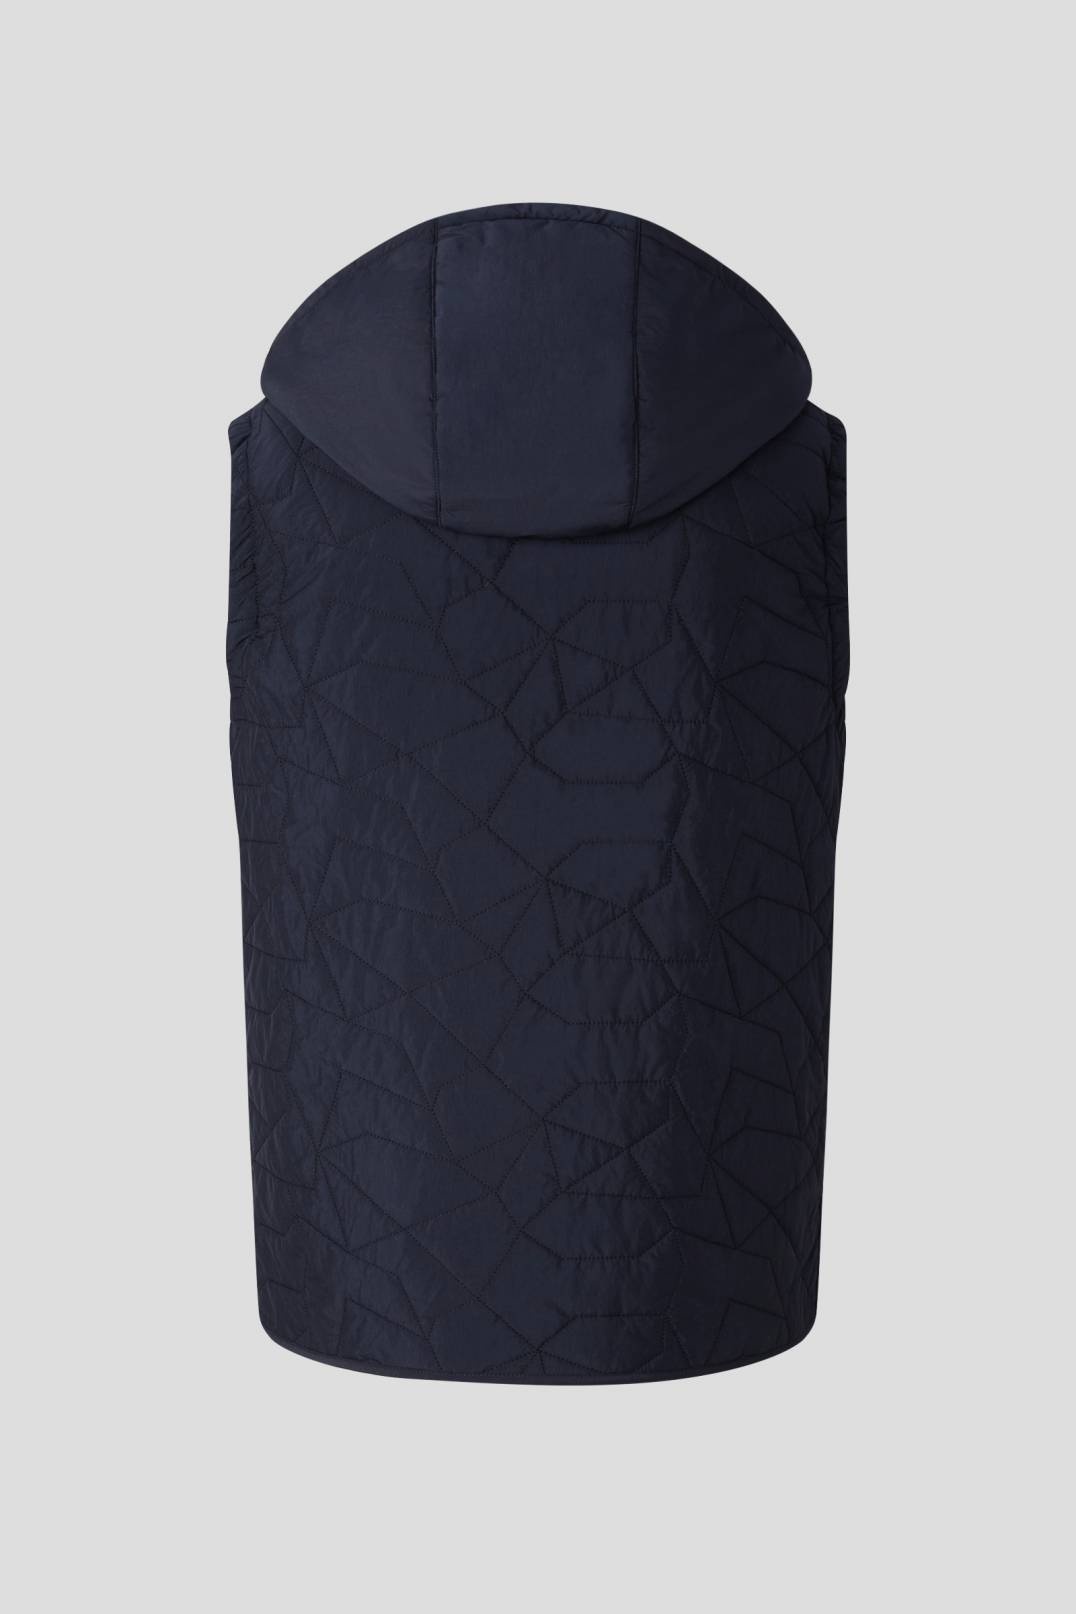 SIMON QUILTED WAISTCOAT IN NAVY BLUE - 3